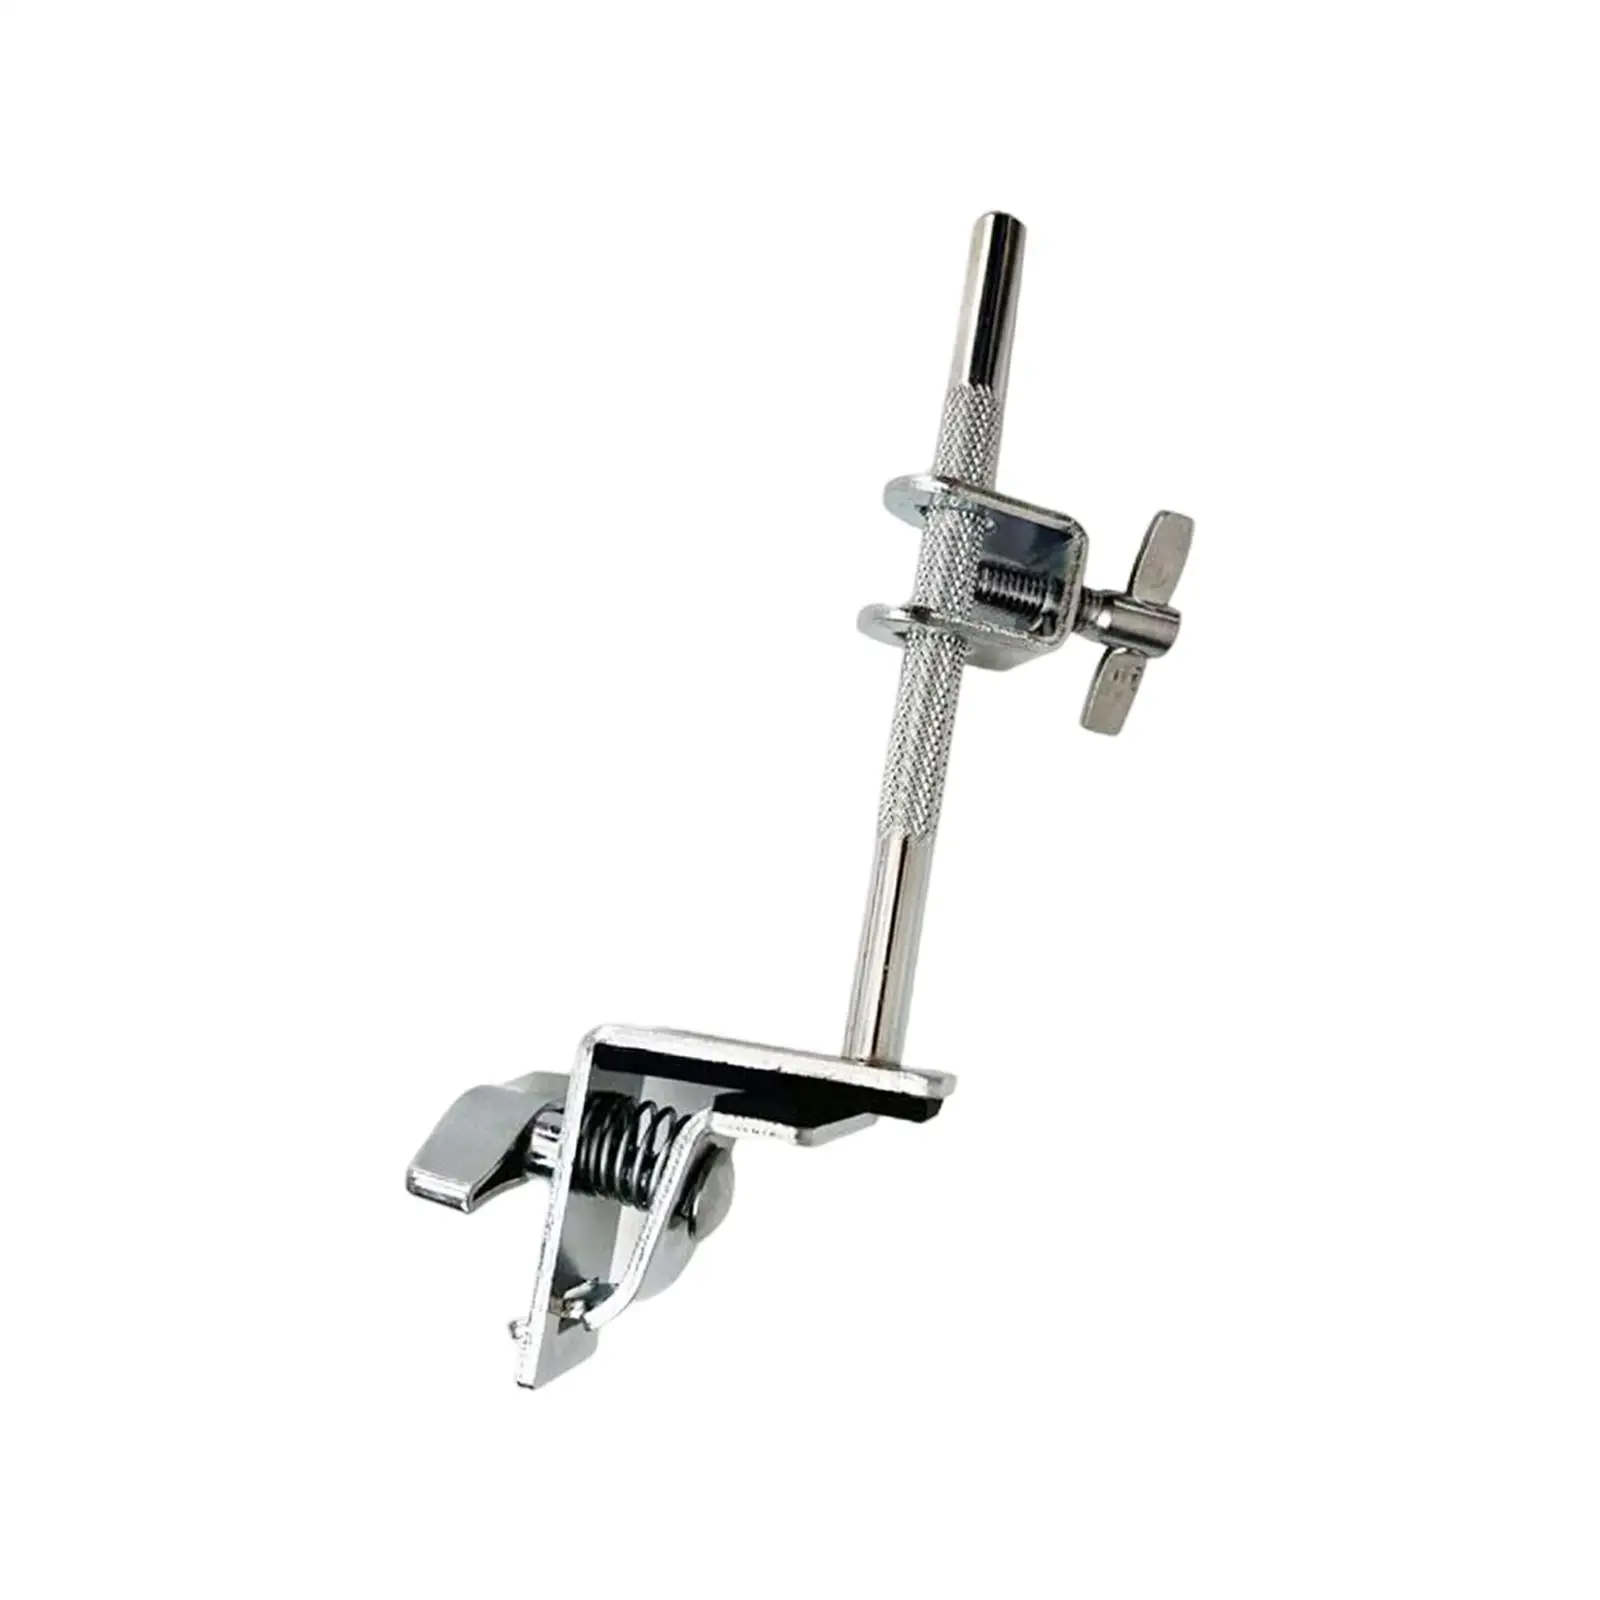 Metal Bass Drum Cowbell Clamp Accessories,Clamp Bracket ,Adjustable for Musical Instrument